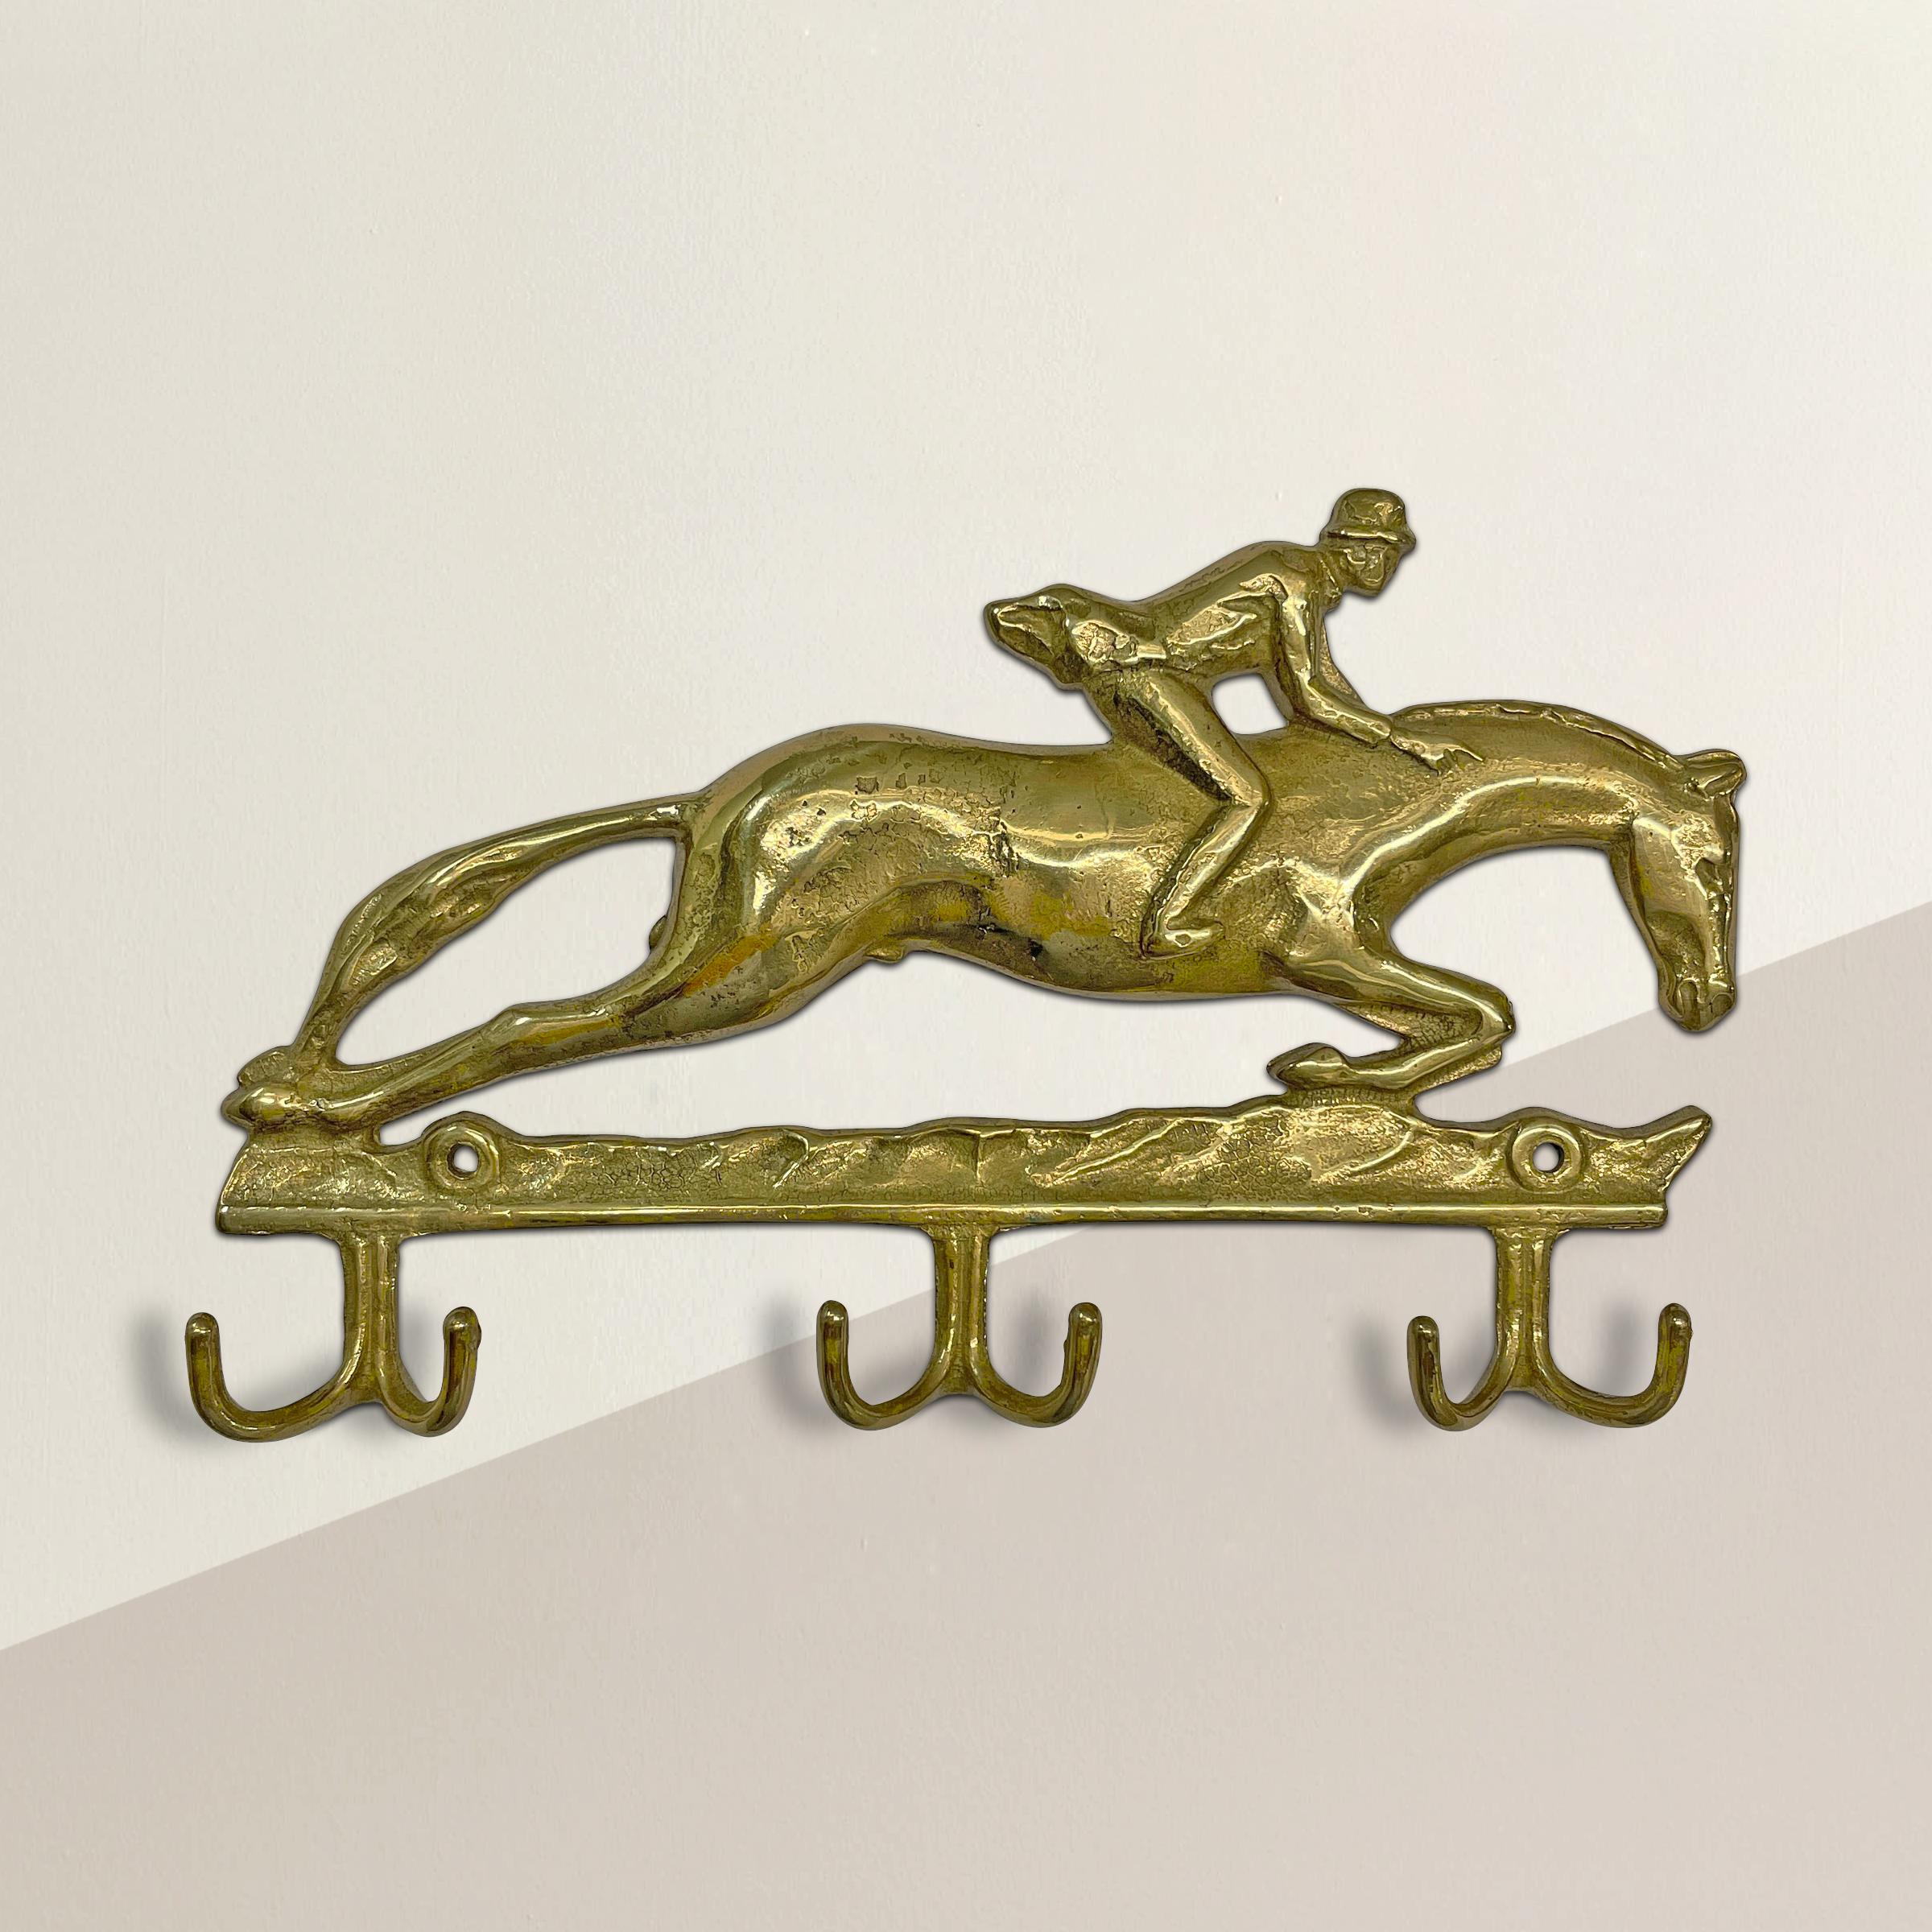 A playful vintage English brass wall hook with a horse and rider, perfect for hanging your purses, coats, necklaces, neckties, or your dog's leashes!